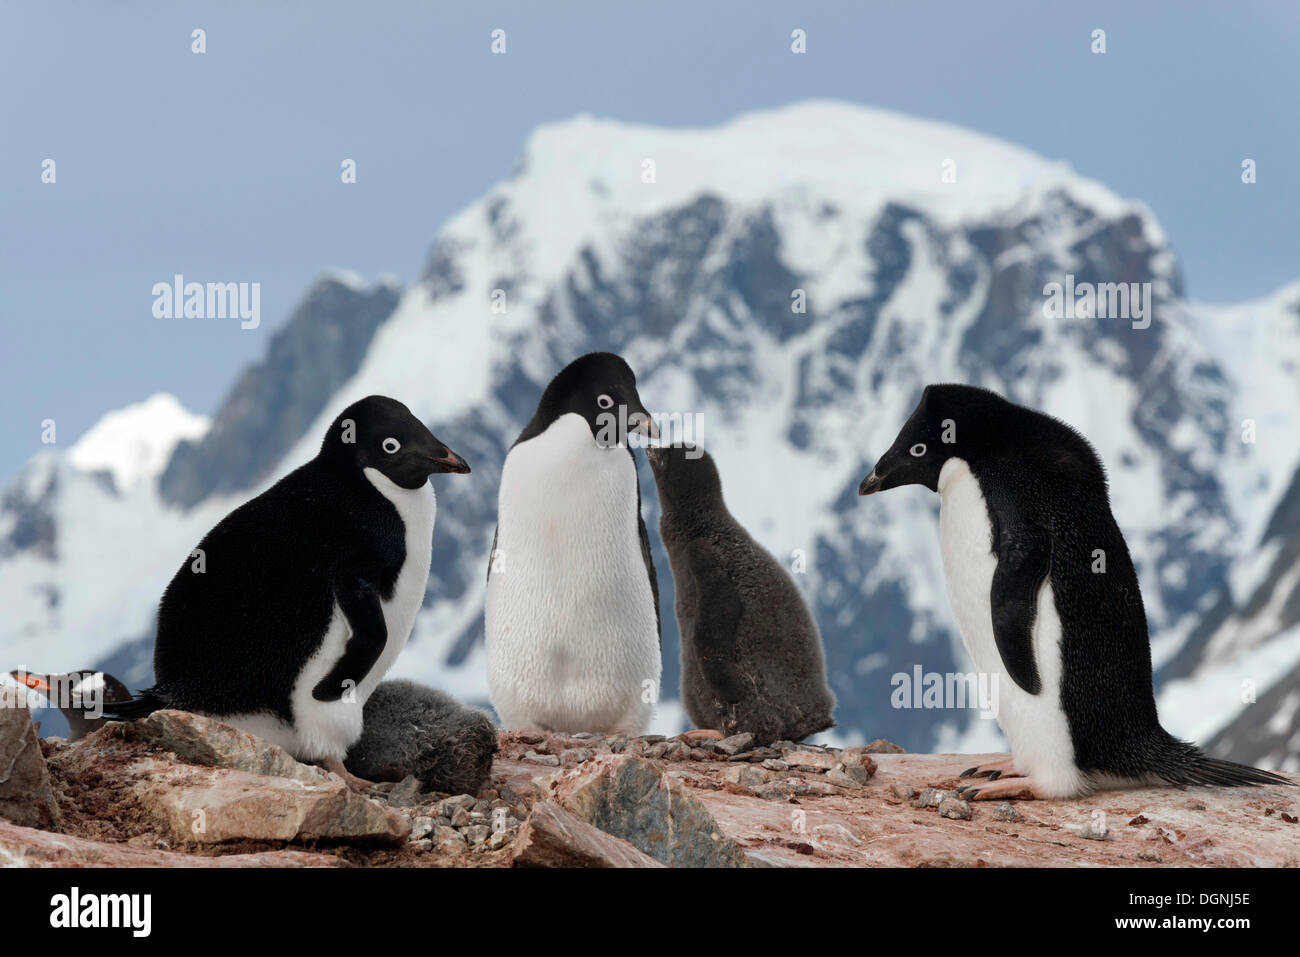 Adélie Penguins (Pygoscelis adeliae), parent birds with chicks standing in front of mountain scenery, Petermann Island Stock Photo